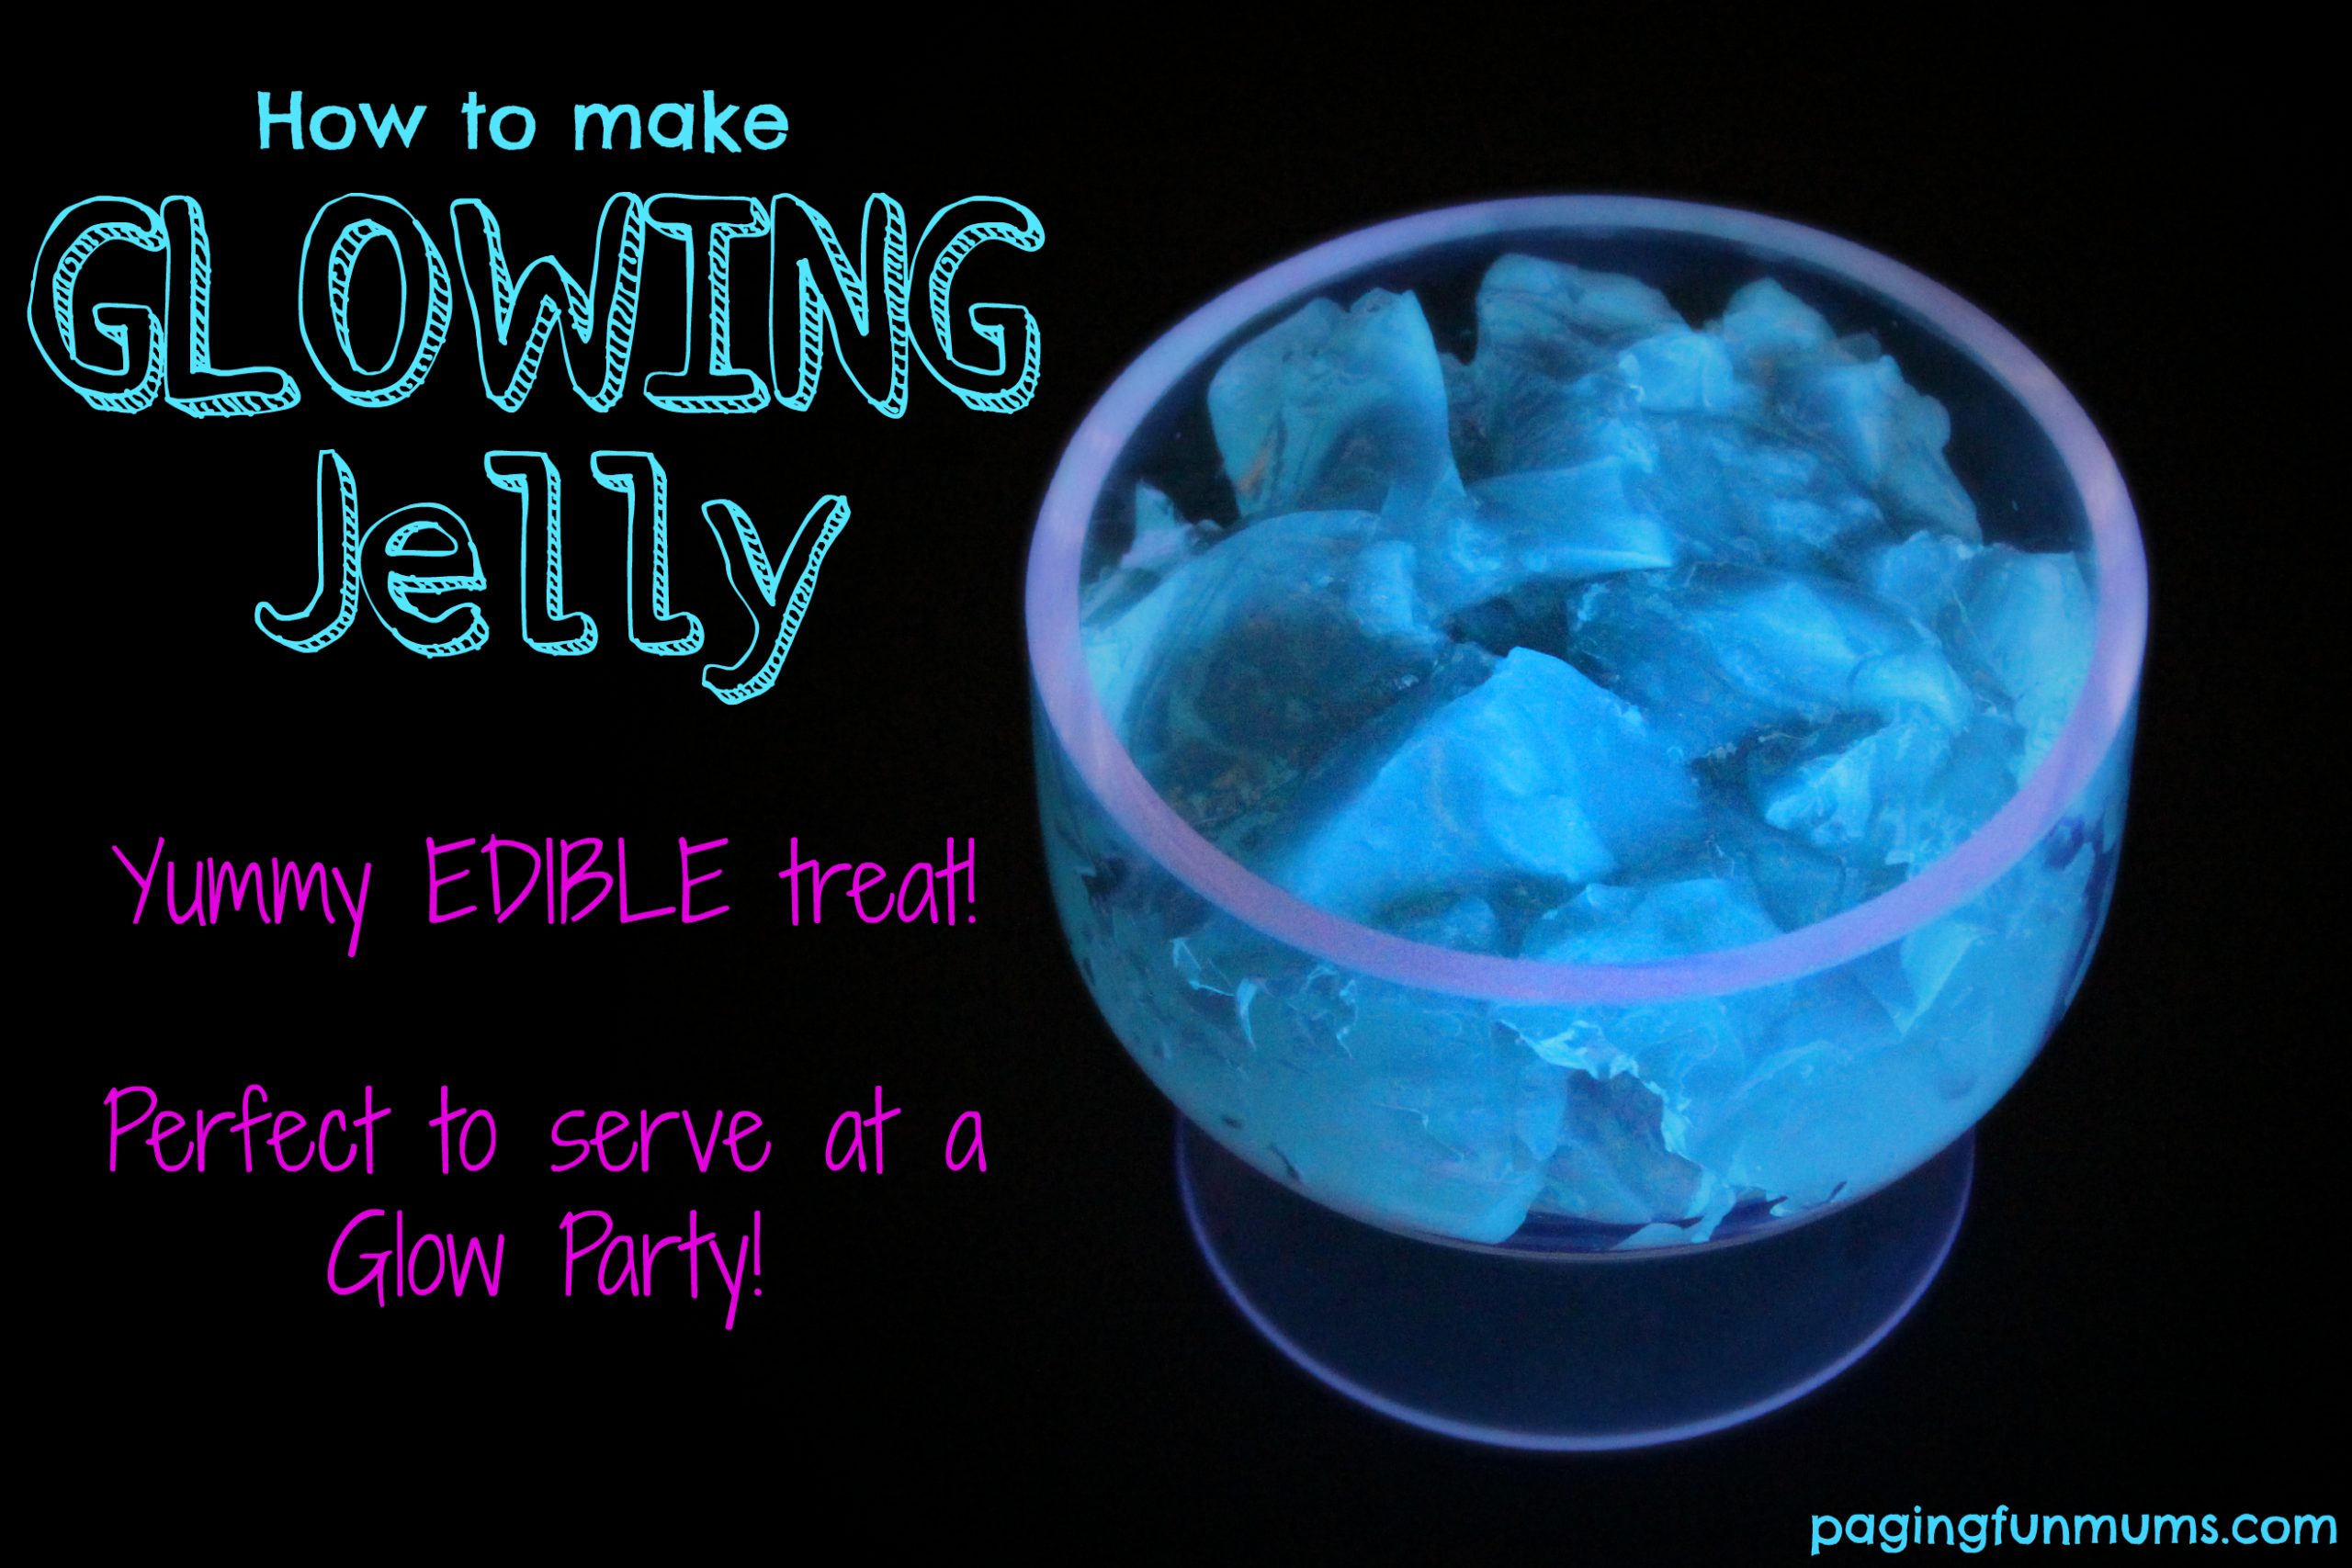 How to Make Glow-in-the-Dark Jell-O